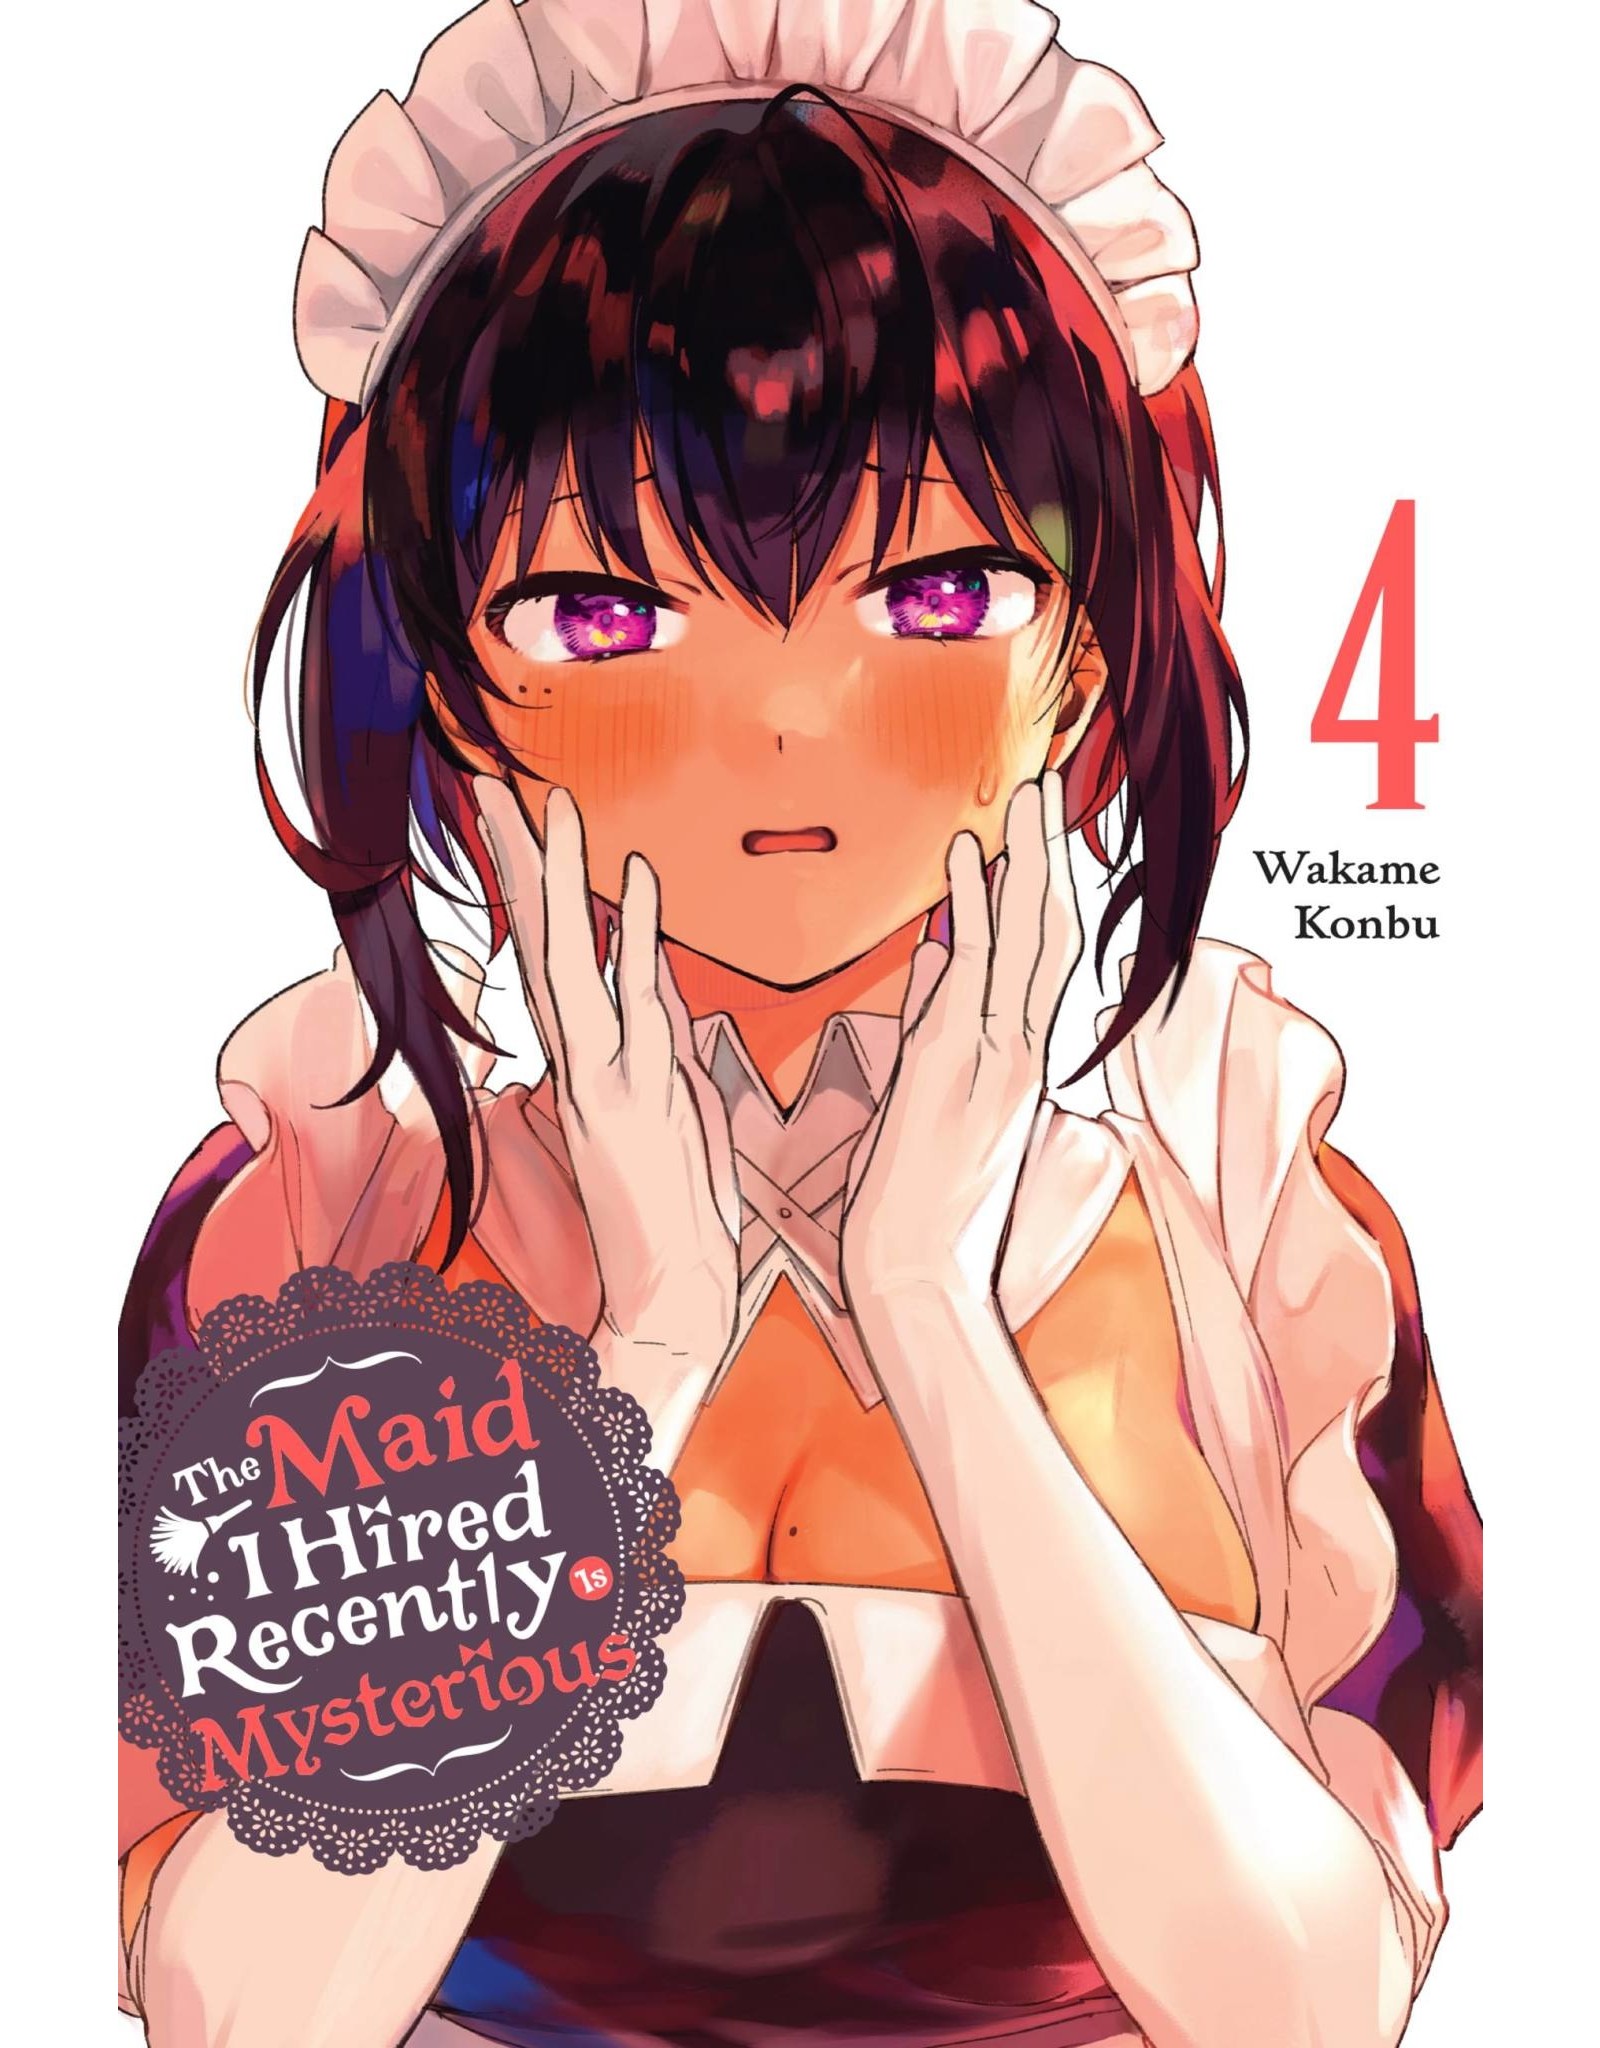 The Maid I Hired Recently is Mysterious 04 (Engelstalig) - Manga